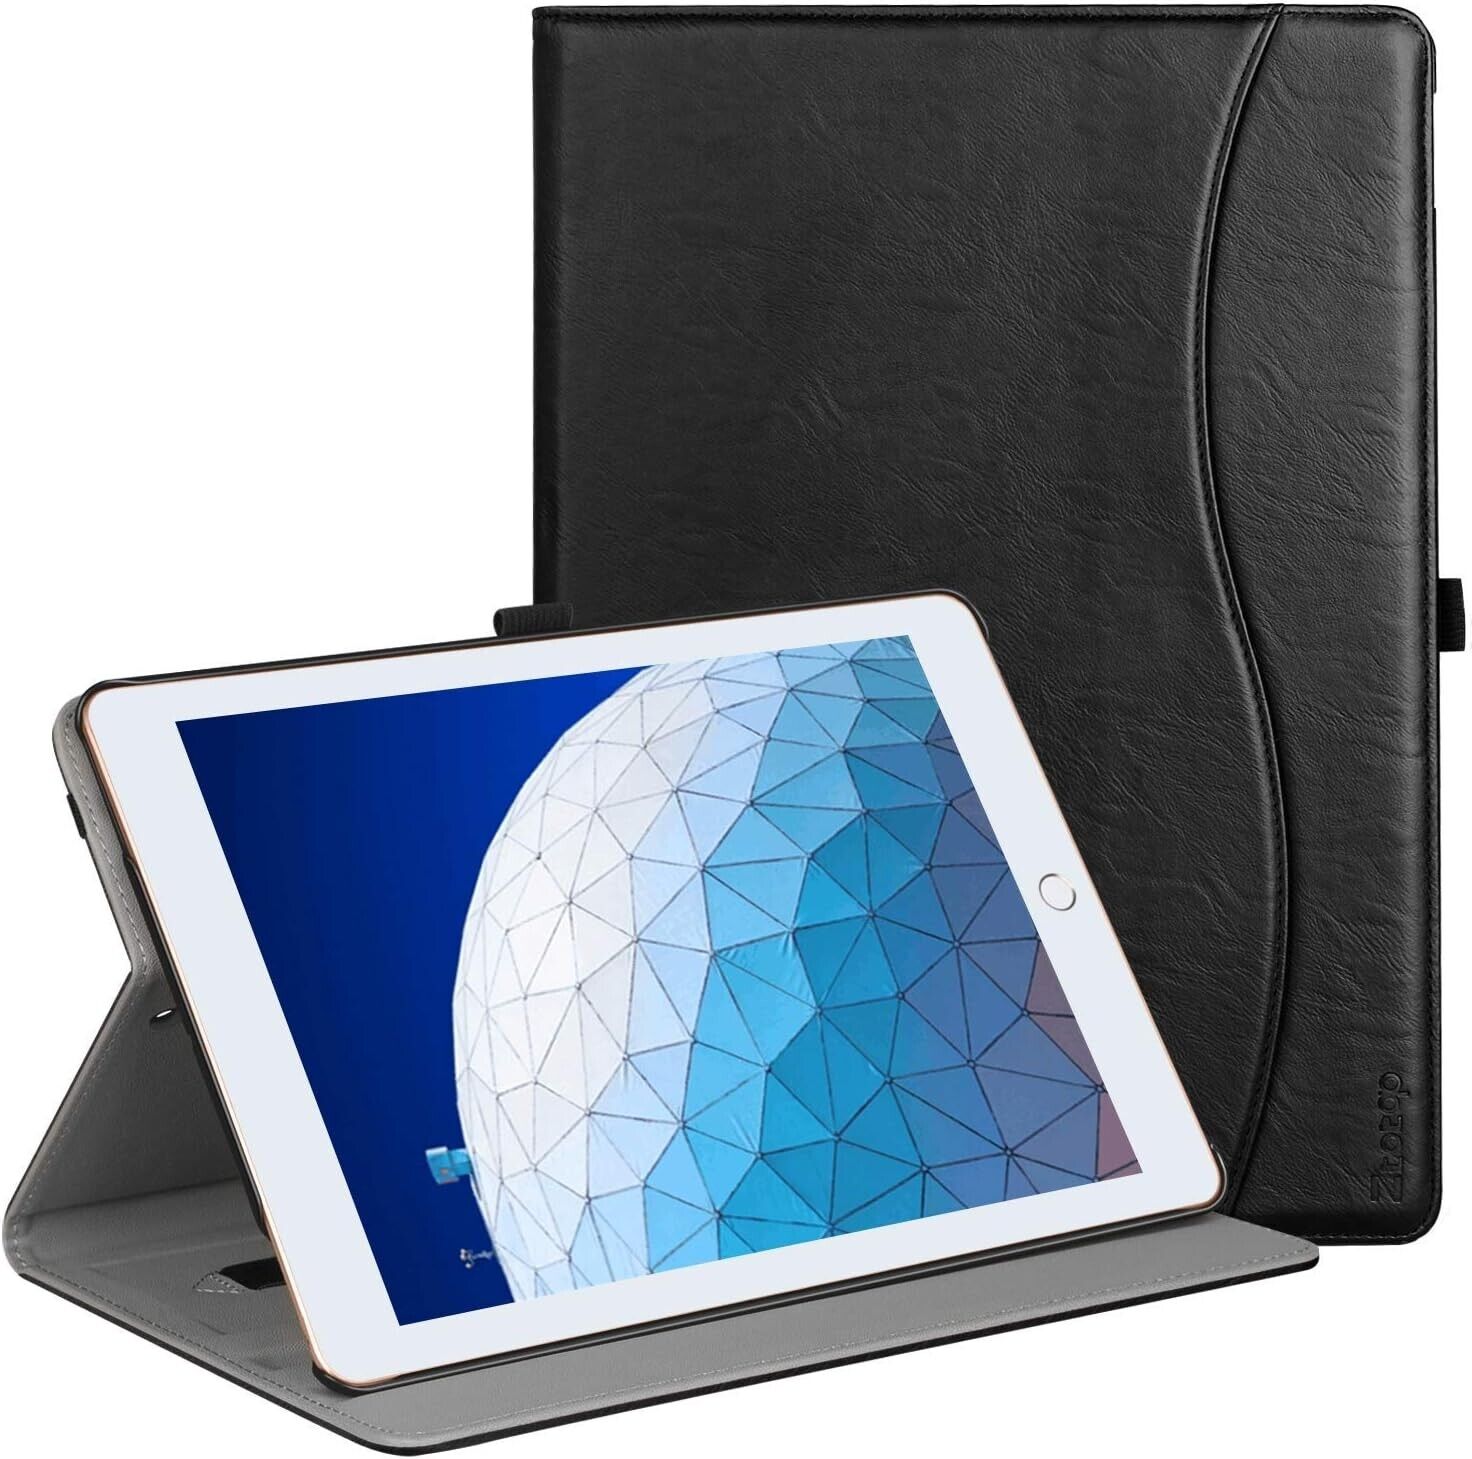 Ztotop Case for iPad Air 10.5 (3rd Gen) 2019/iPad Pro 10.5 2017, Premium Leather